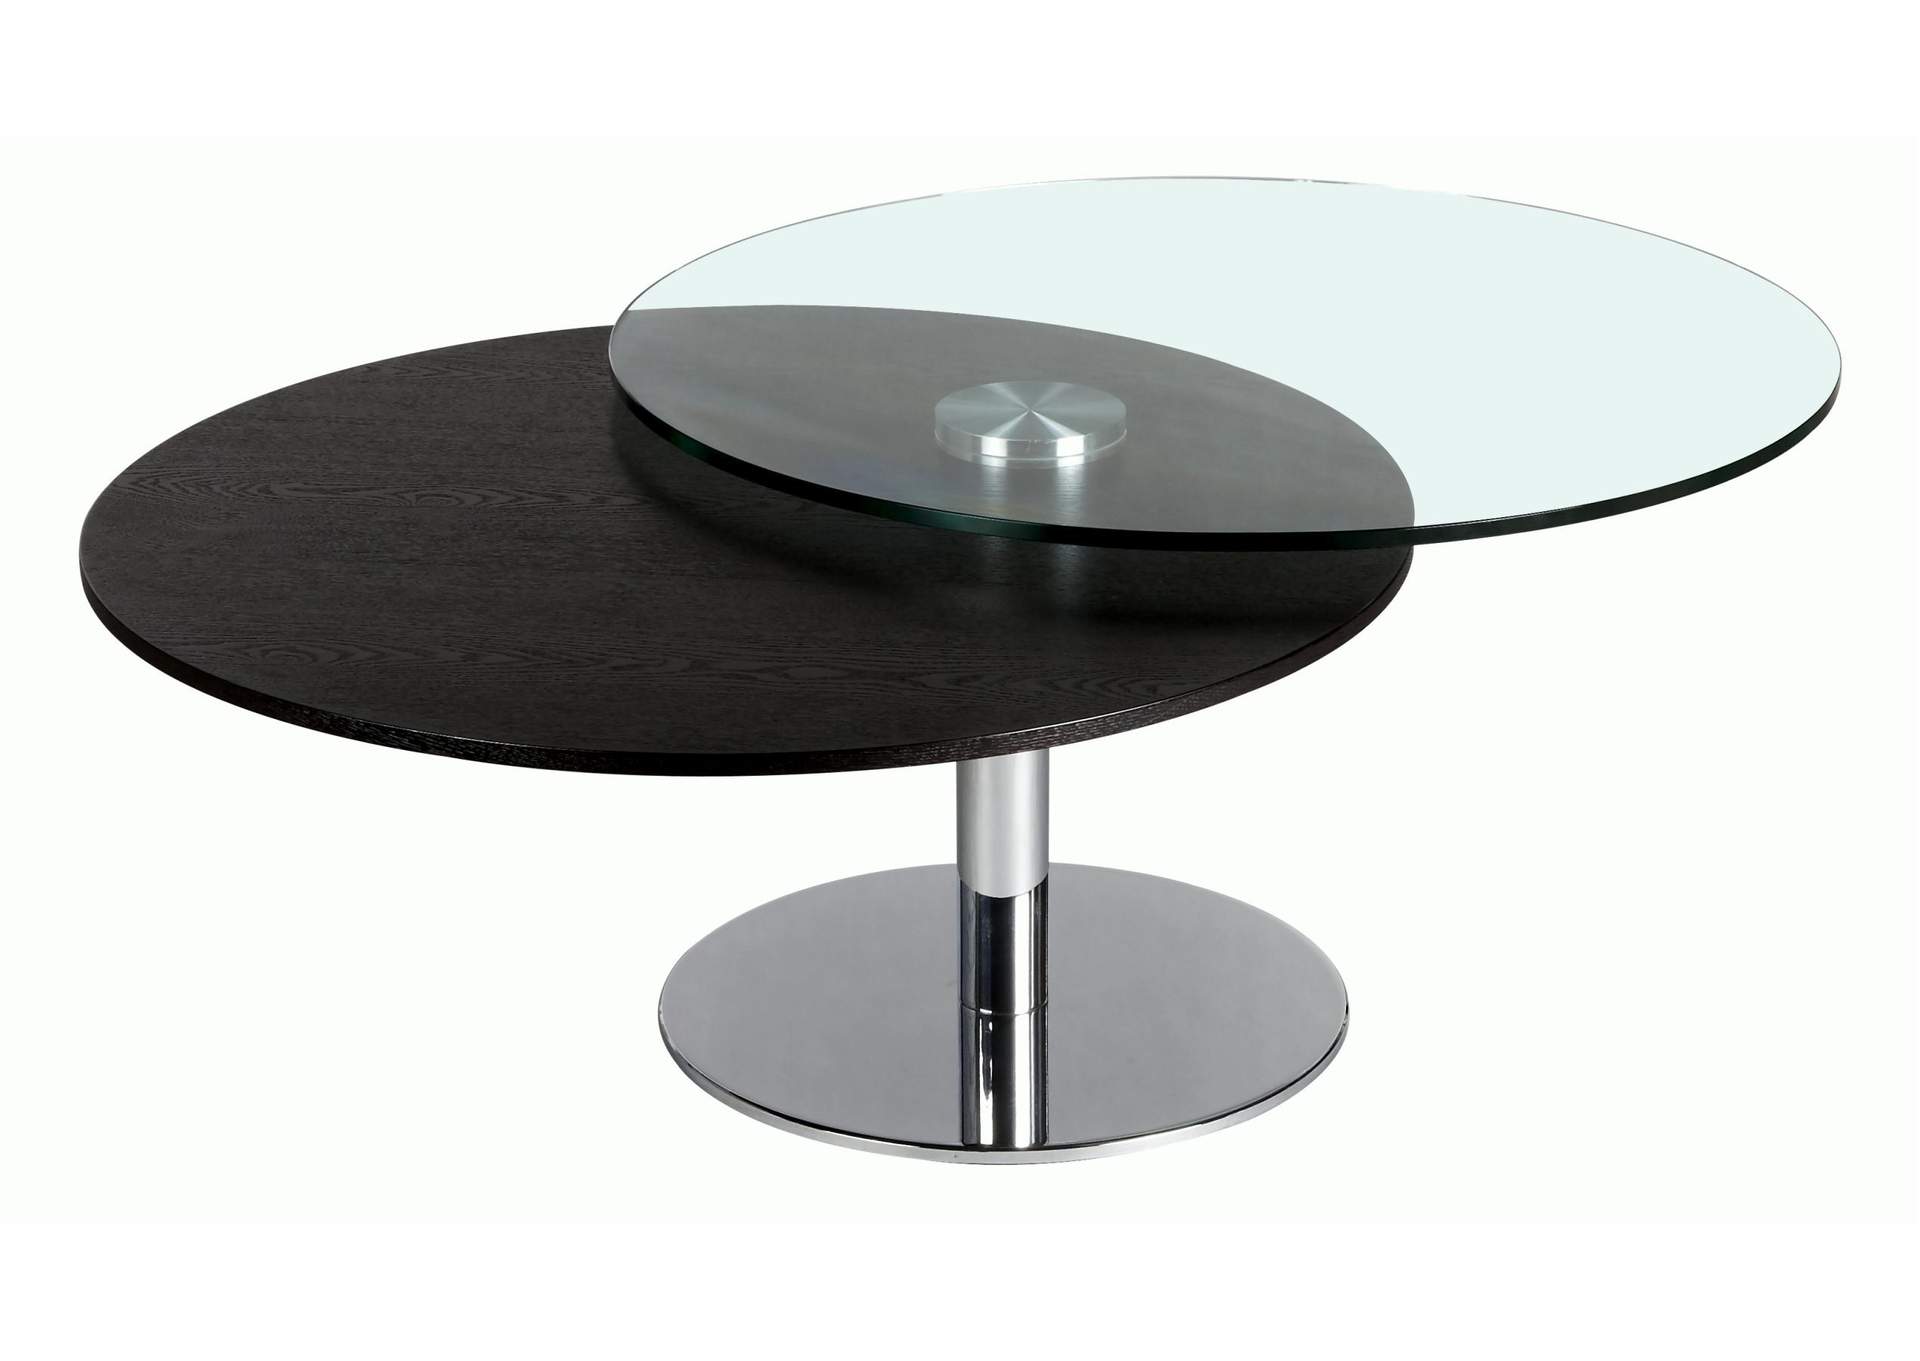 Merlot & Chrome Contemporary Glass Top Motion Cocktail Table,Chintaly Imports